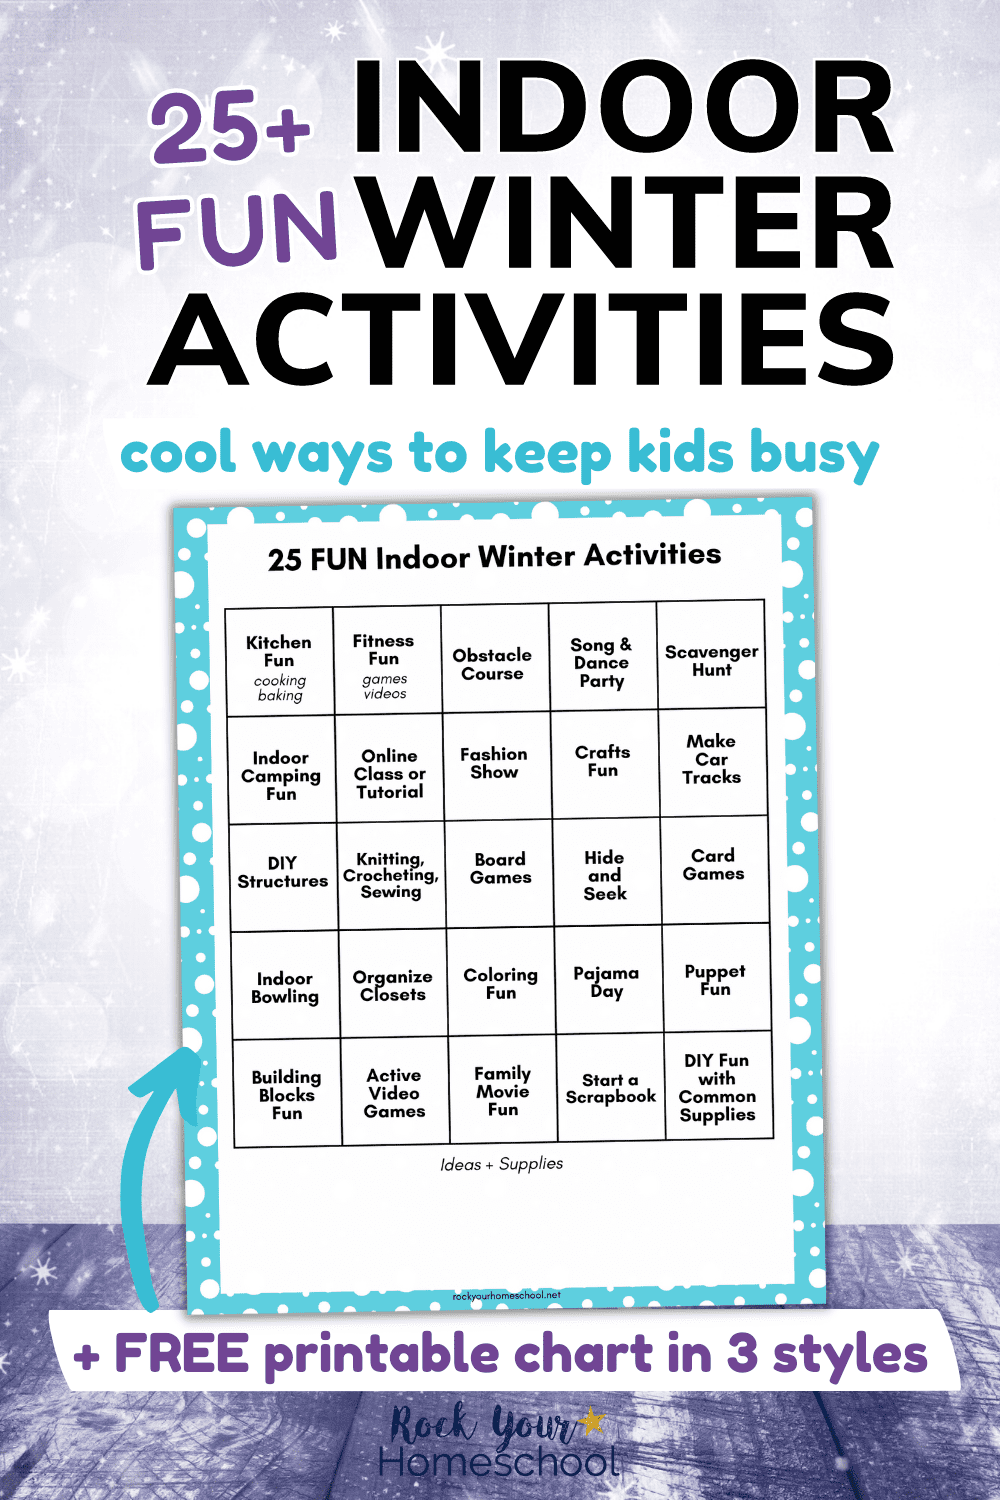 25 Fun Indoor Winter Activities for kids chart on background with snowflakes and wood surface